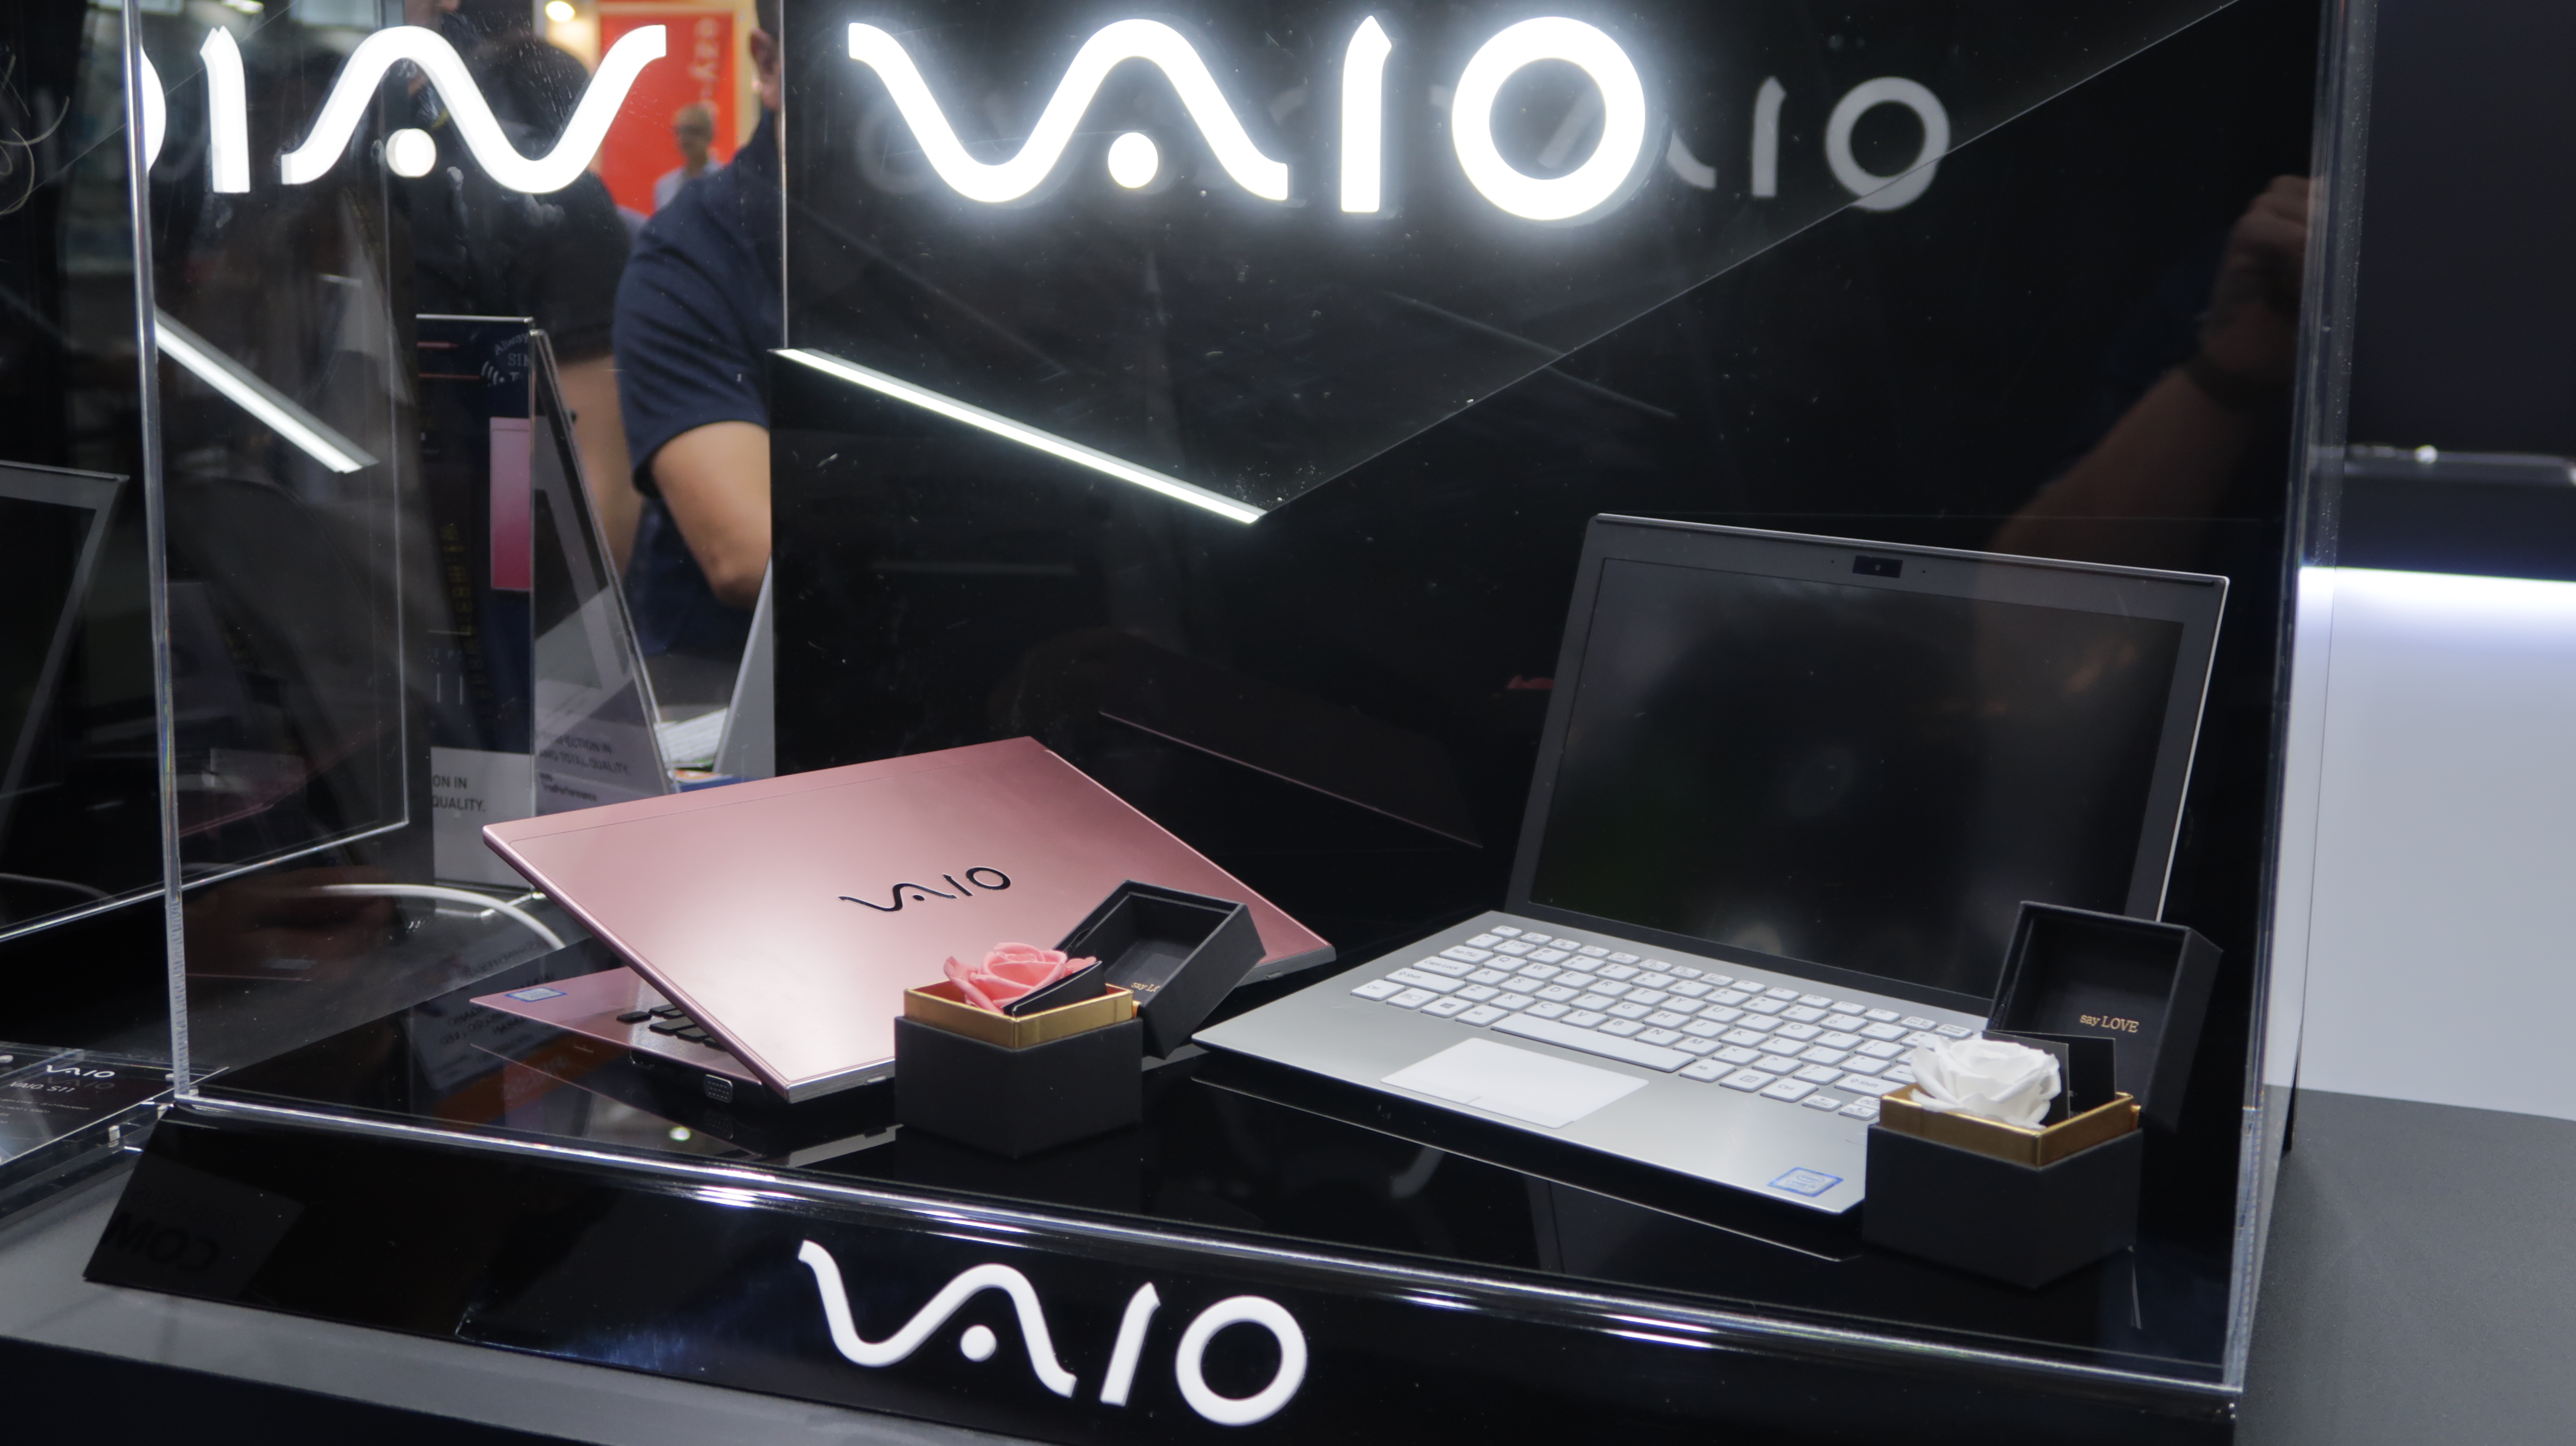 VAIO is back - A look at the VAIO S11 and S13 Notebooks - The Tech 